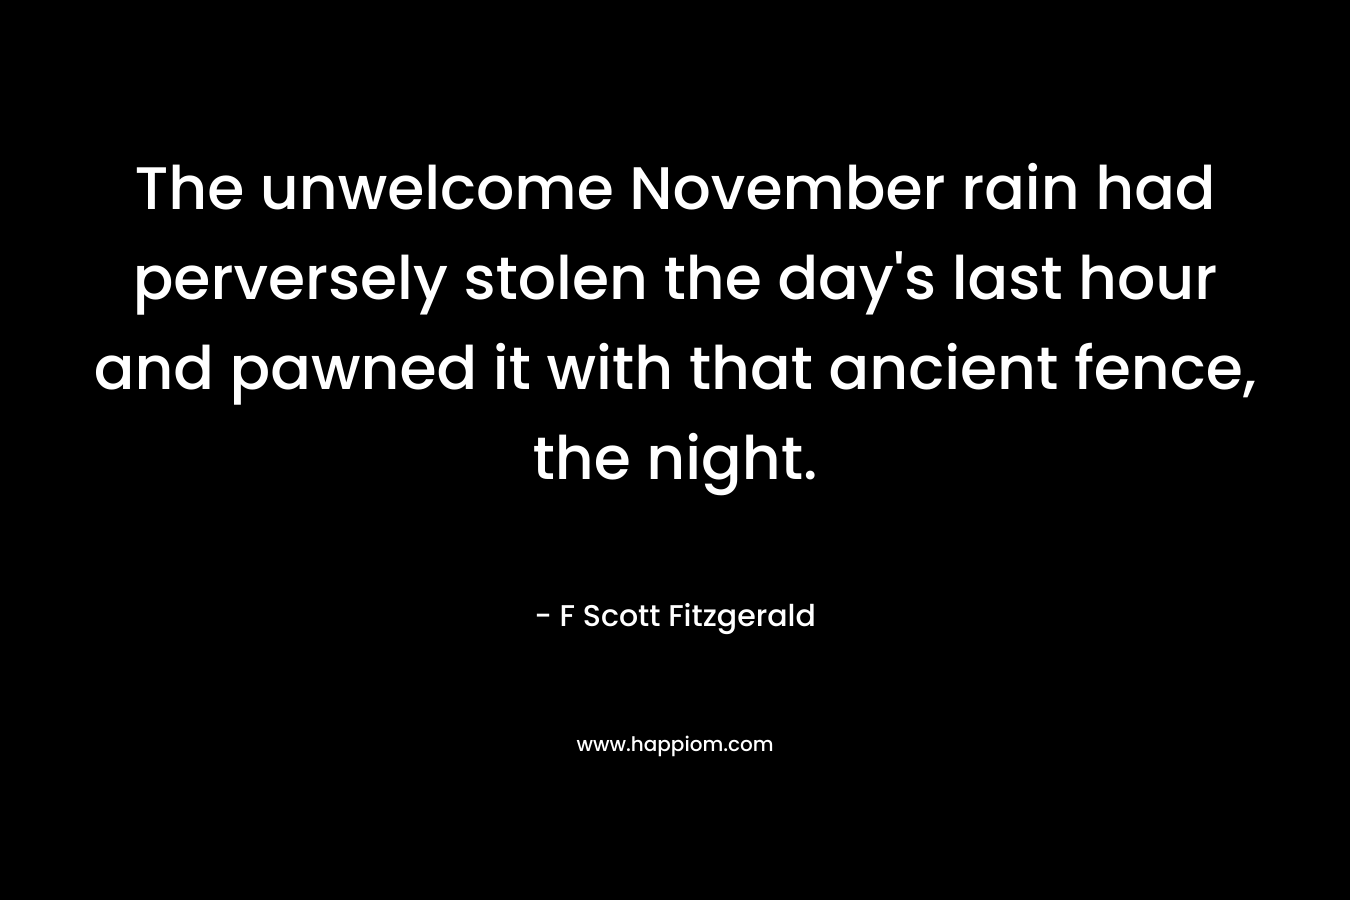 The unwelcome November rain had perversely stolen the day’s last hour and pawned it with that ancient fence, the night. – F Scott Fitzgerald